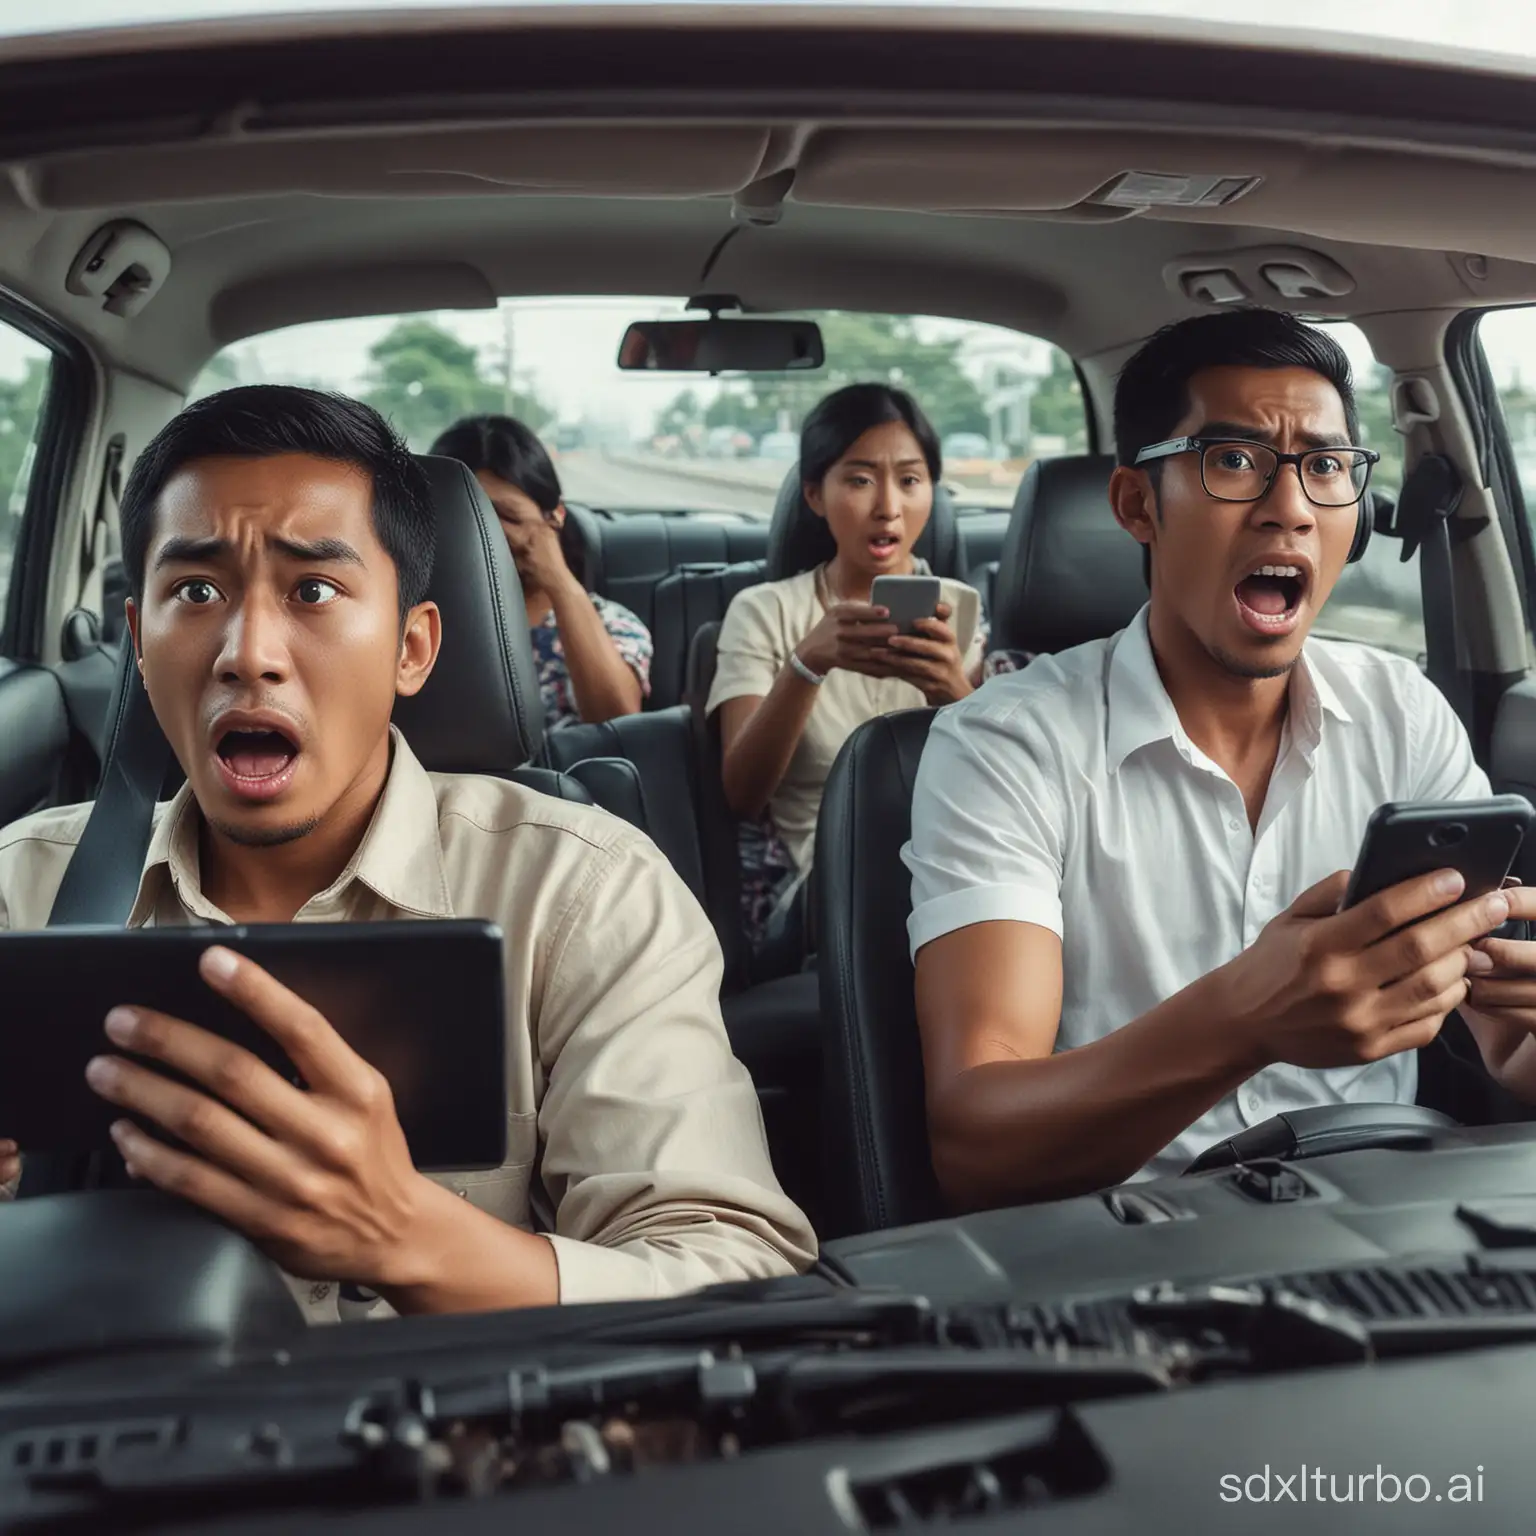 Indonesian-Drivers-Stopping-in-Shock-Reading-Smartphones